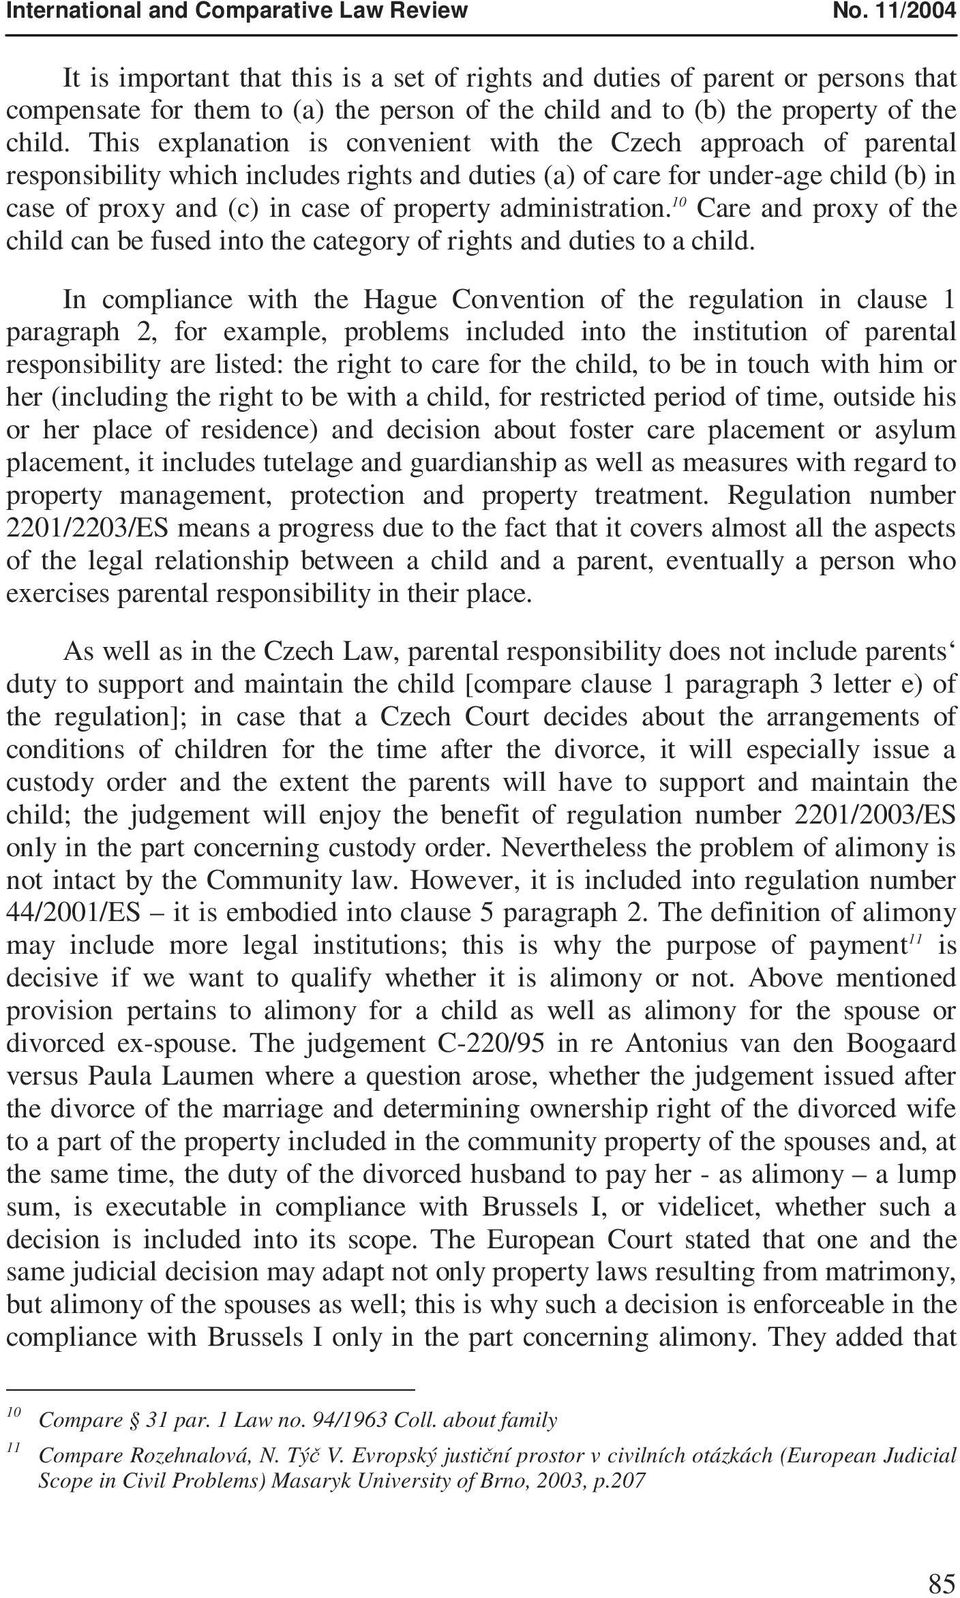 This explanation is convenient with the Czech approach of parental responsibility which includes rights and duties (a) of care for under-age child (b) in case of proxy and (c) in case of property